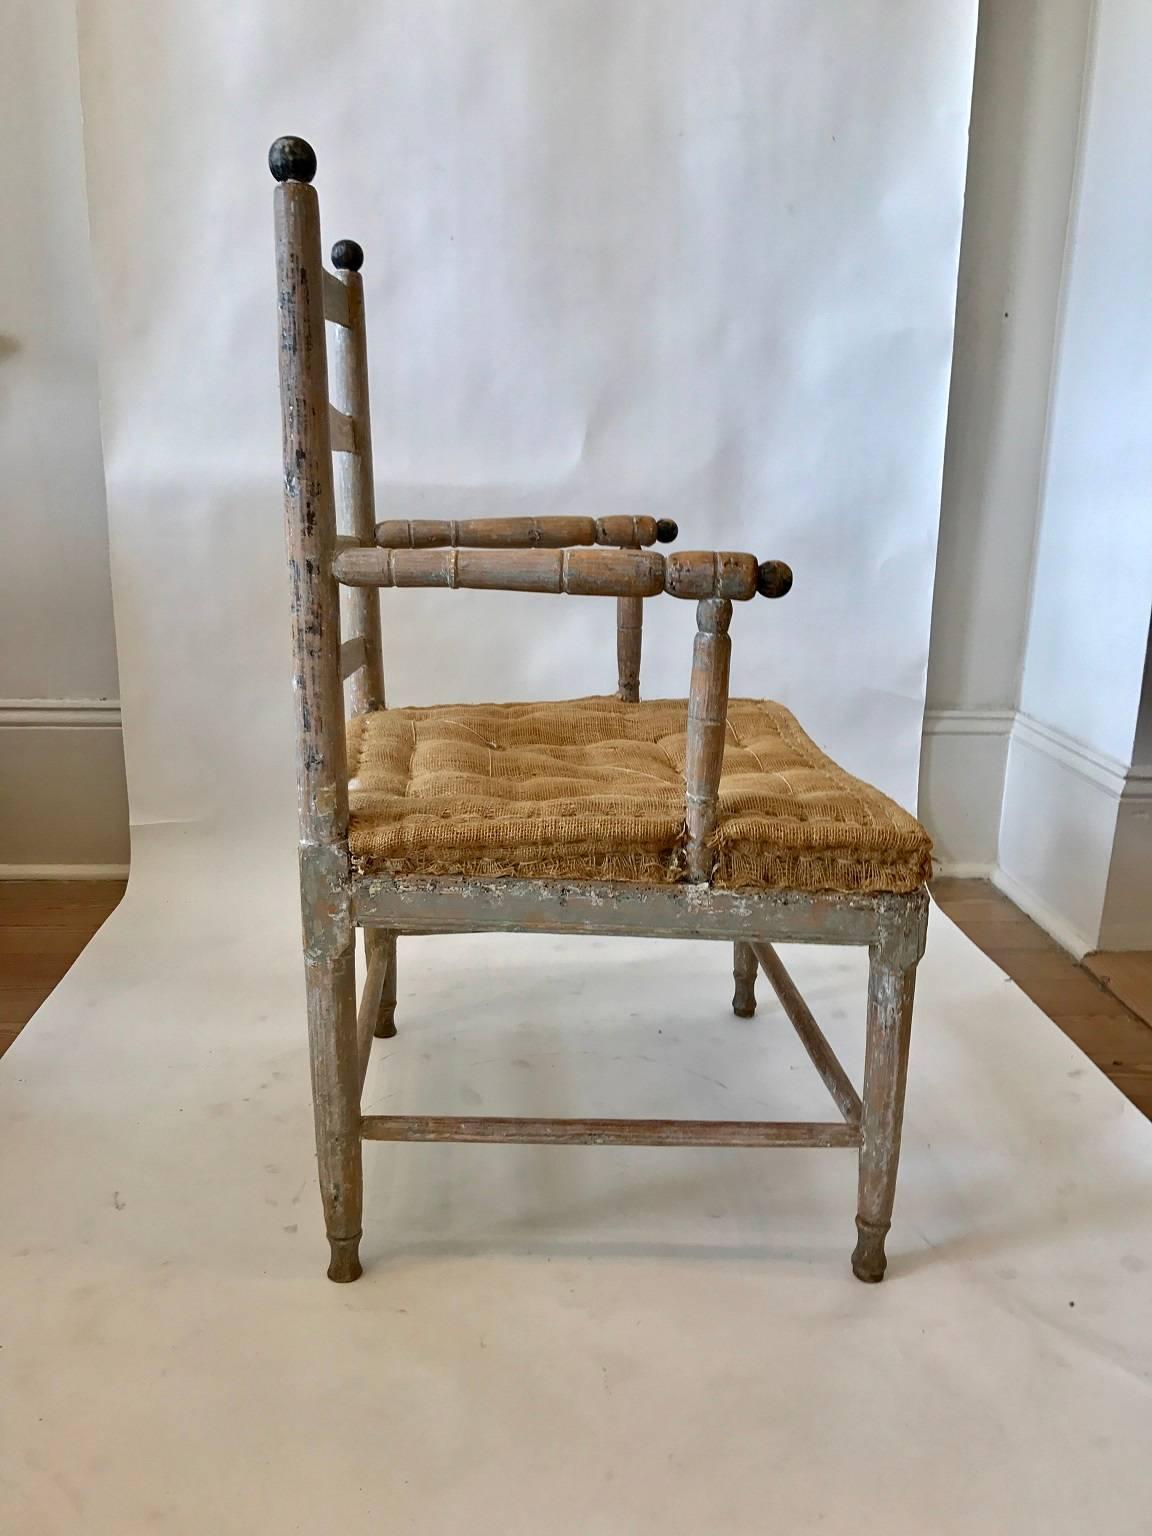 Swedish Gustavian Gripsholm armchair; the ladder-back form with simple but attractive turnings at the arms, legs and back stiles; later paint removed.

 